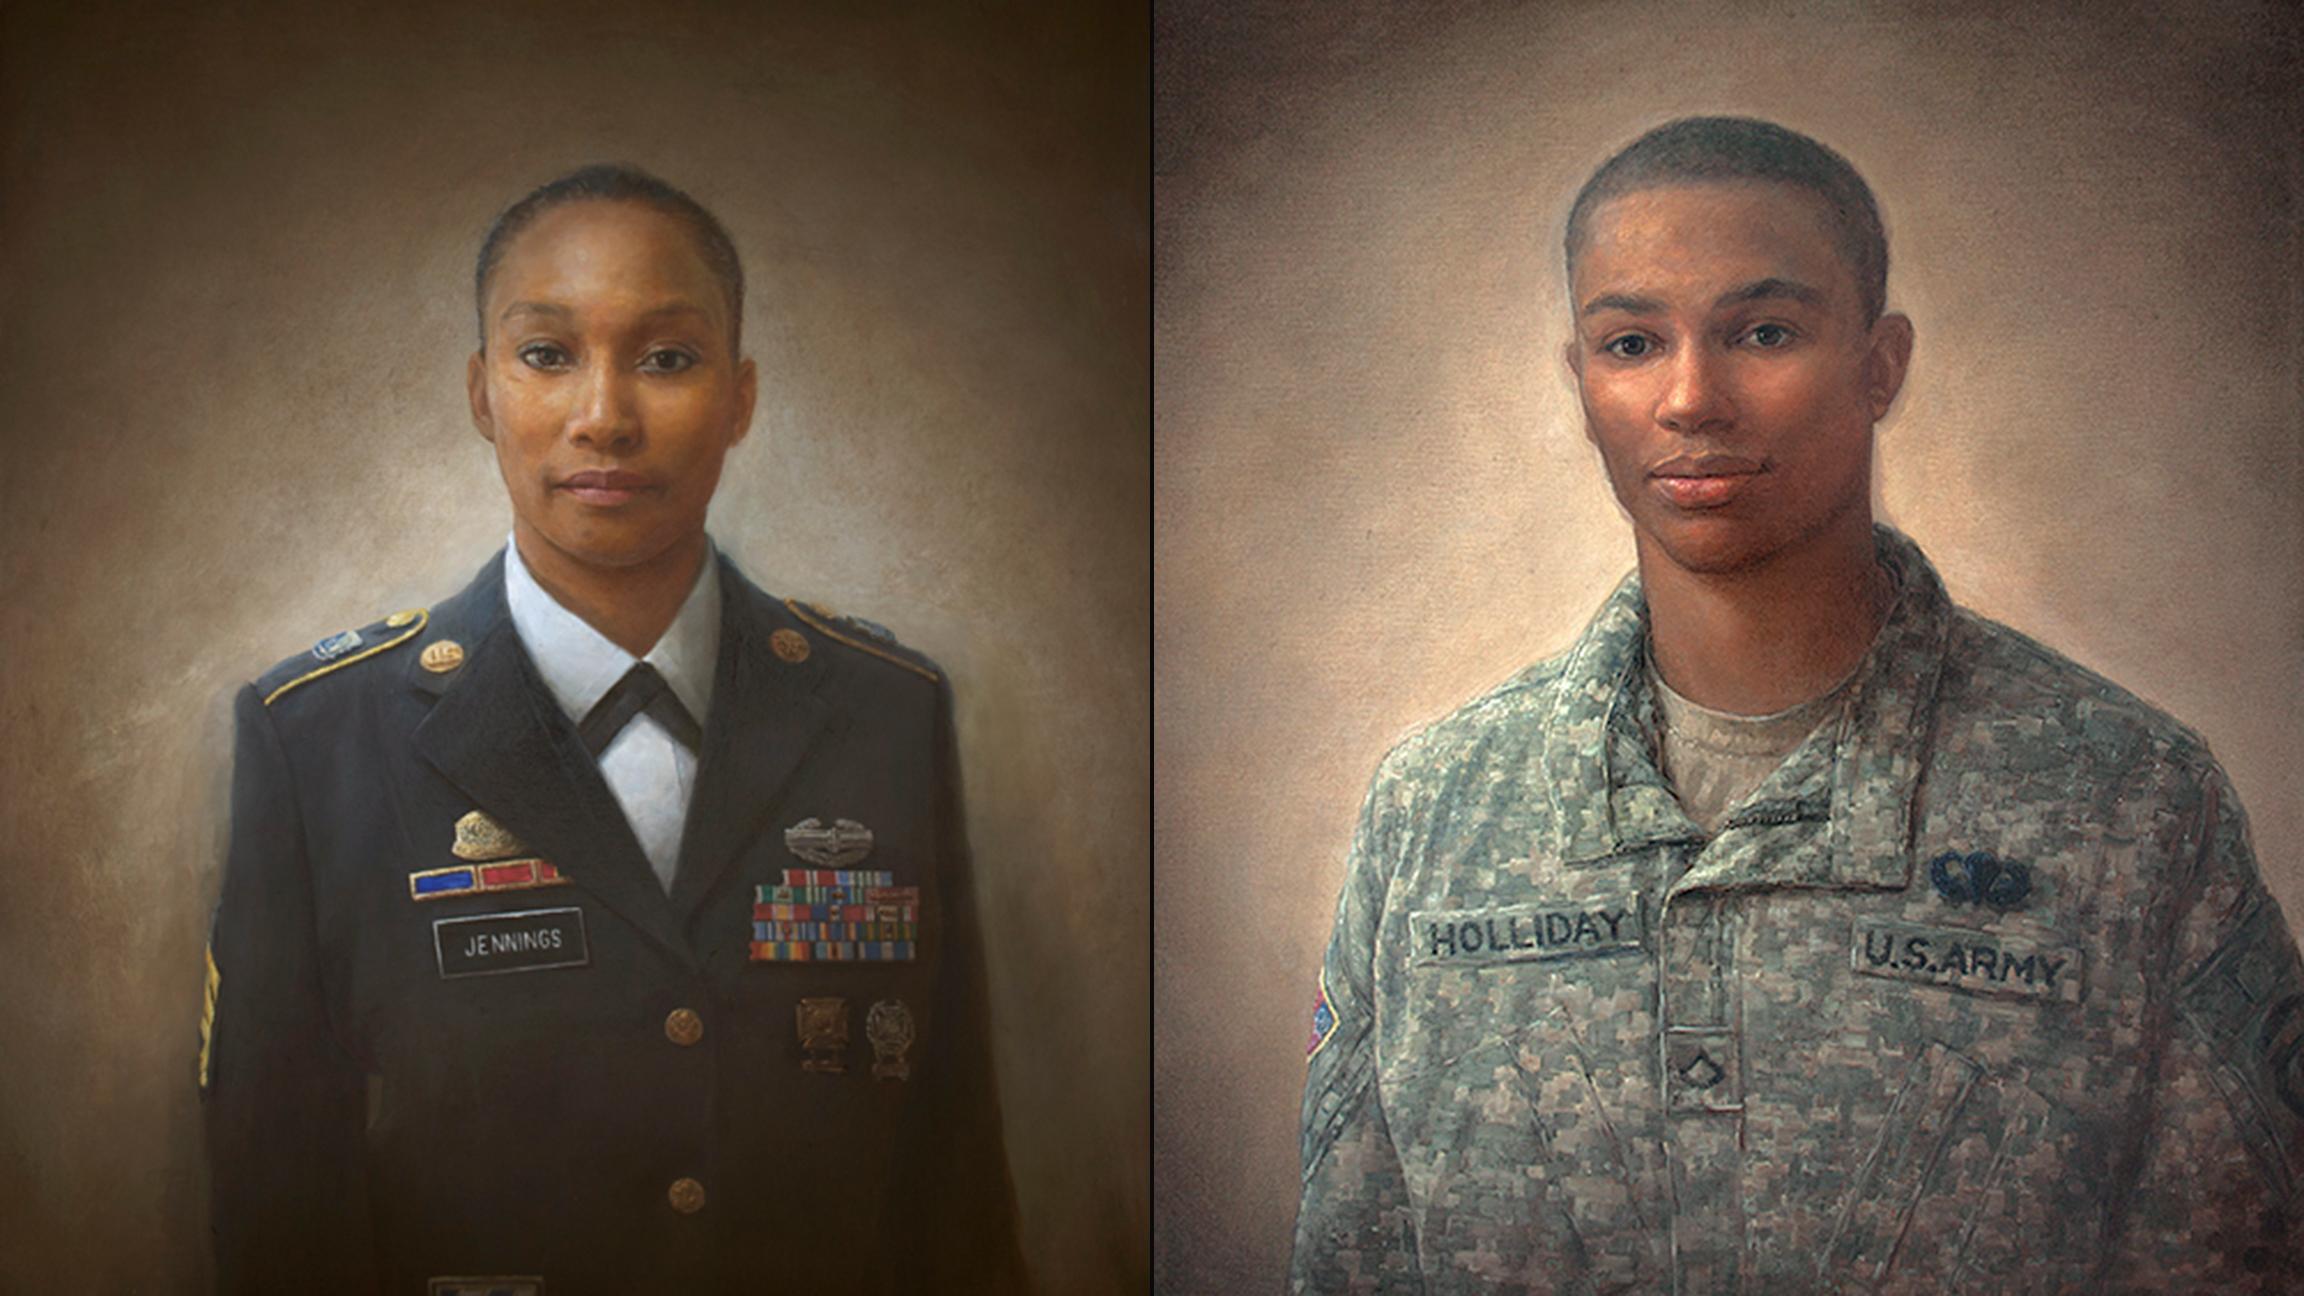 Paintings by Matt Mitchell from “100 Face of War” include portraits of Alma Jennings, left, and Jaron Holliday.